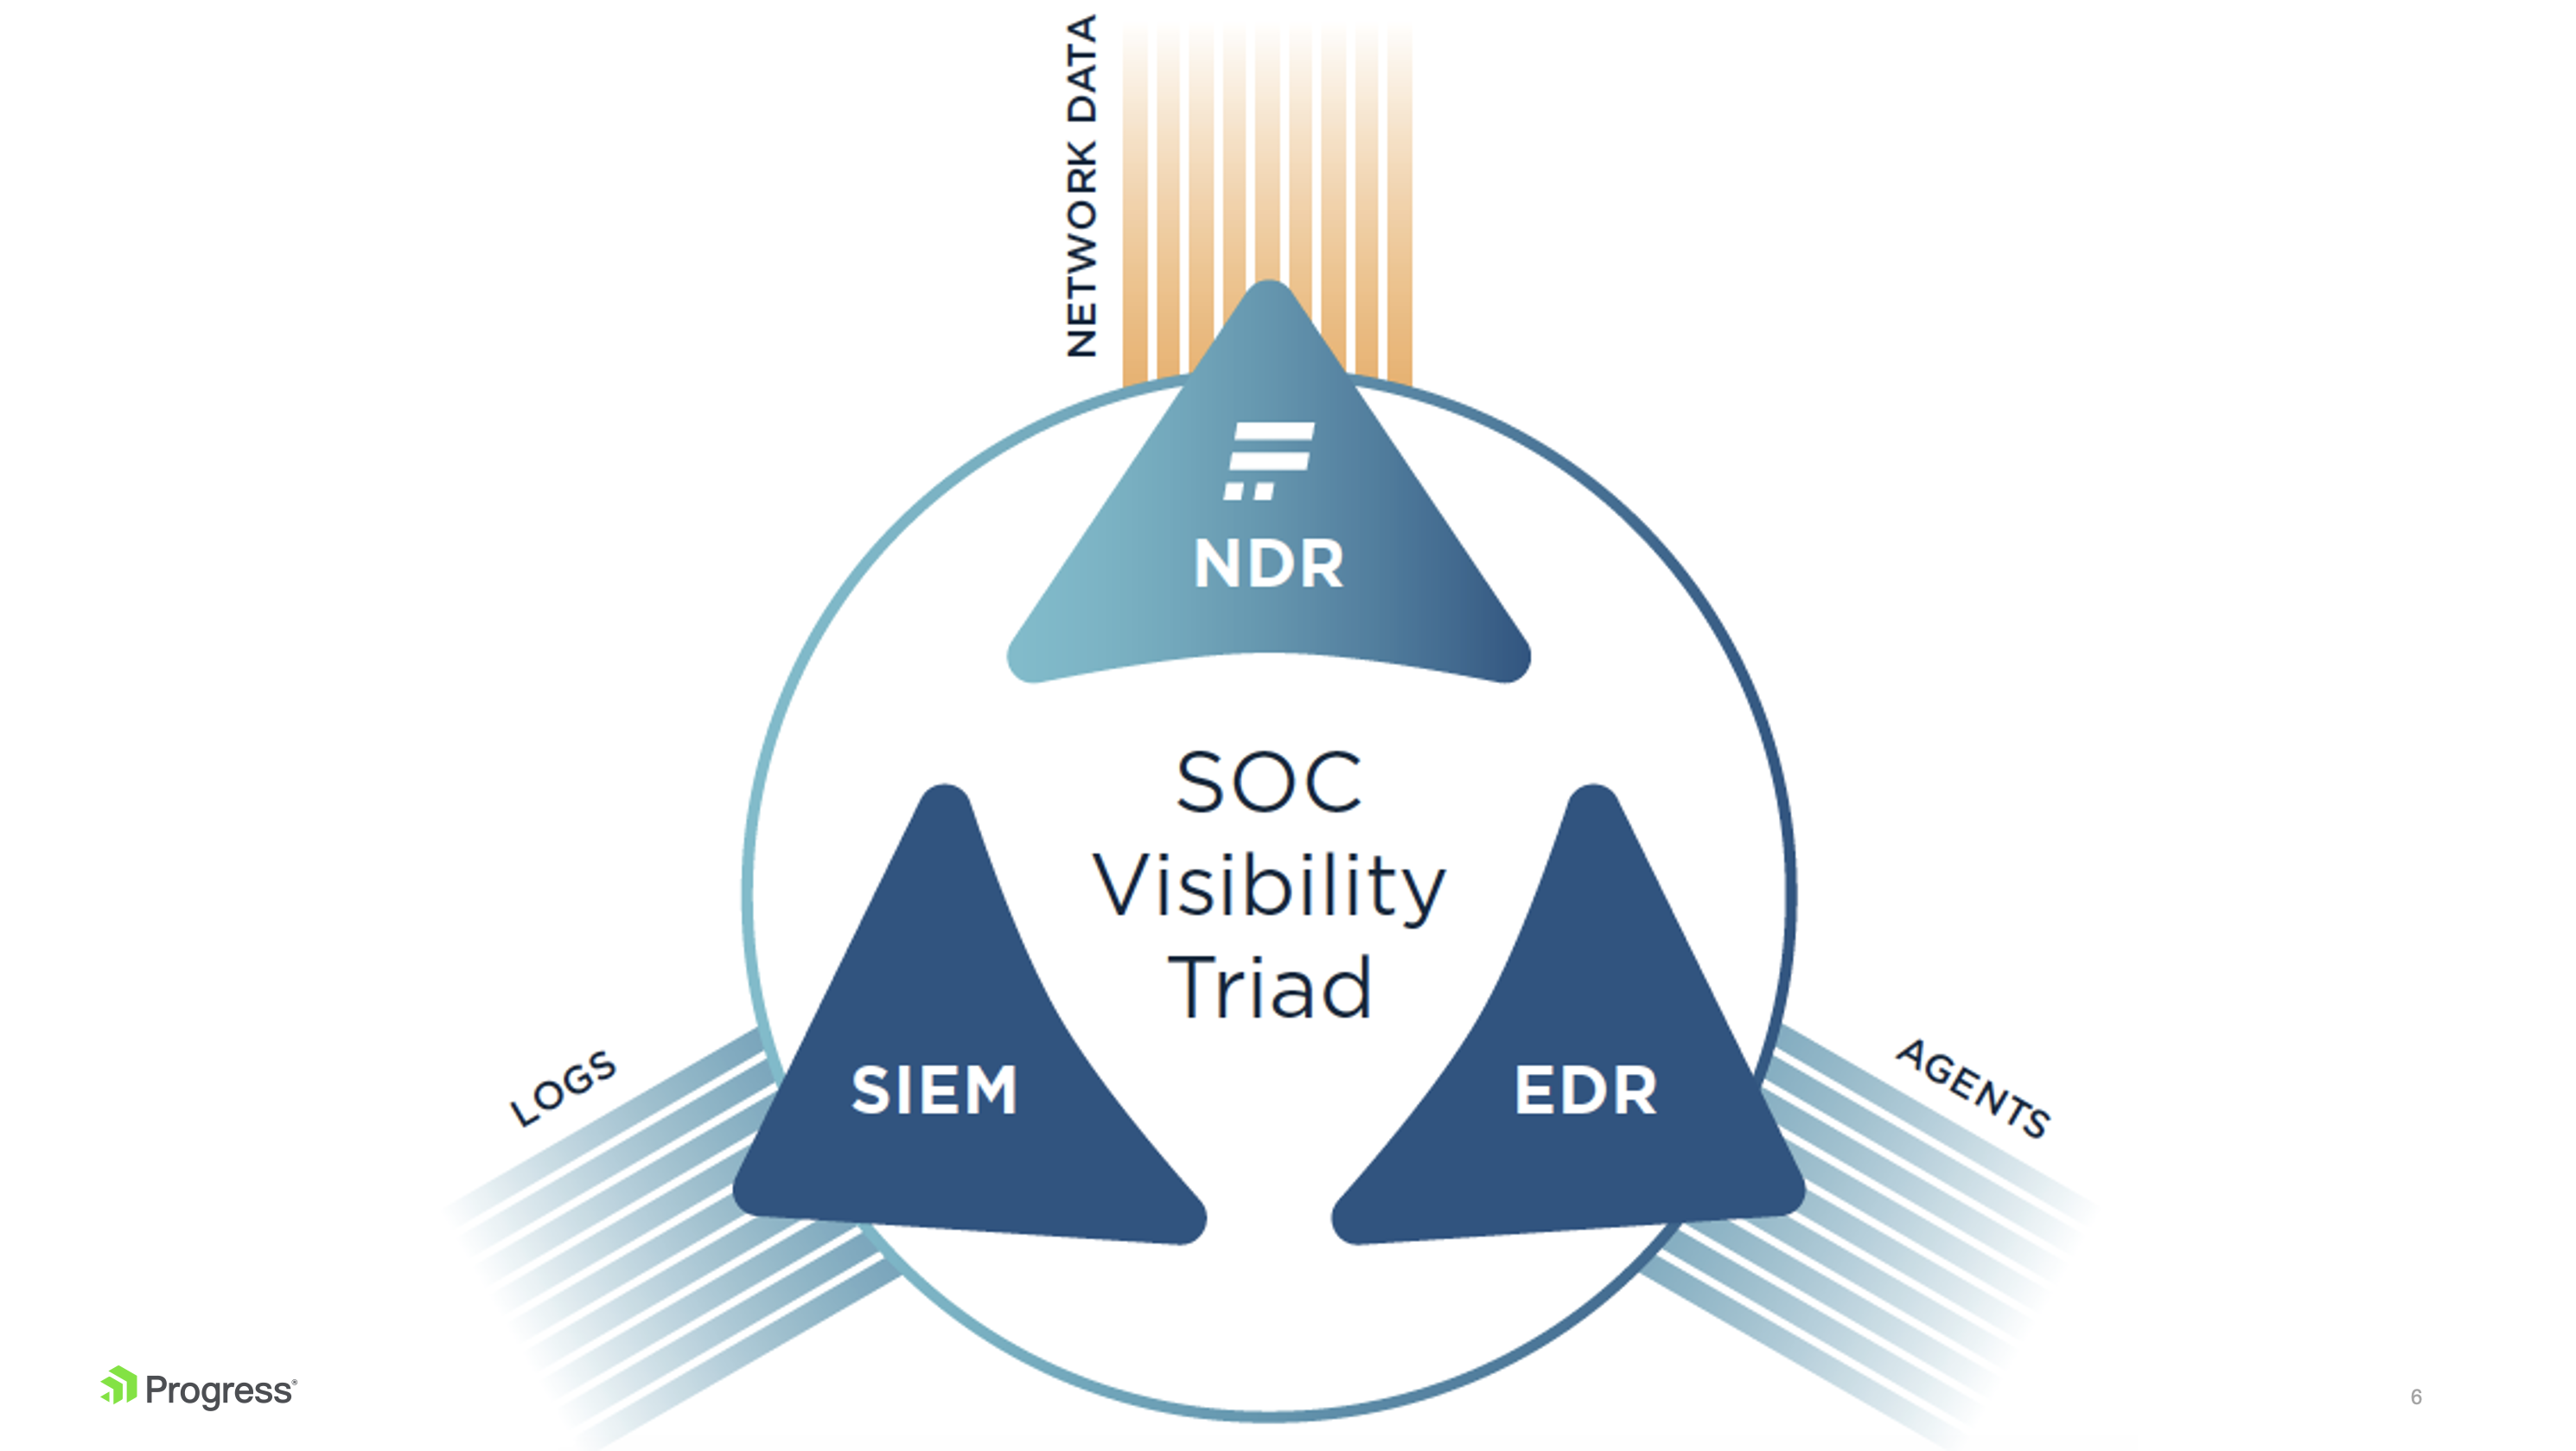 The three pillars of protection: SIEM - Logs, NDR - Network Data, EDR - Agents